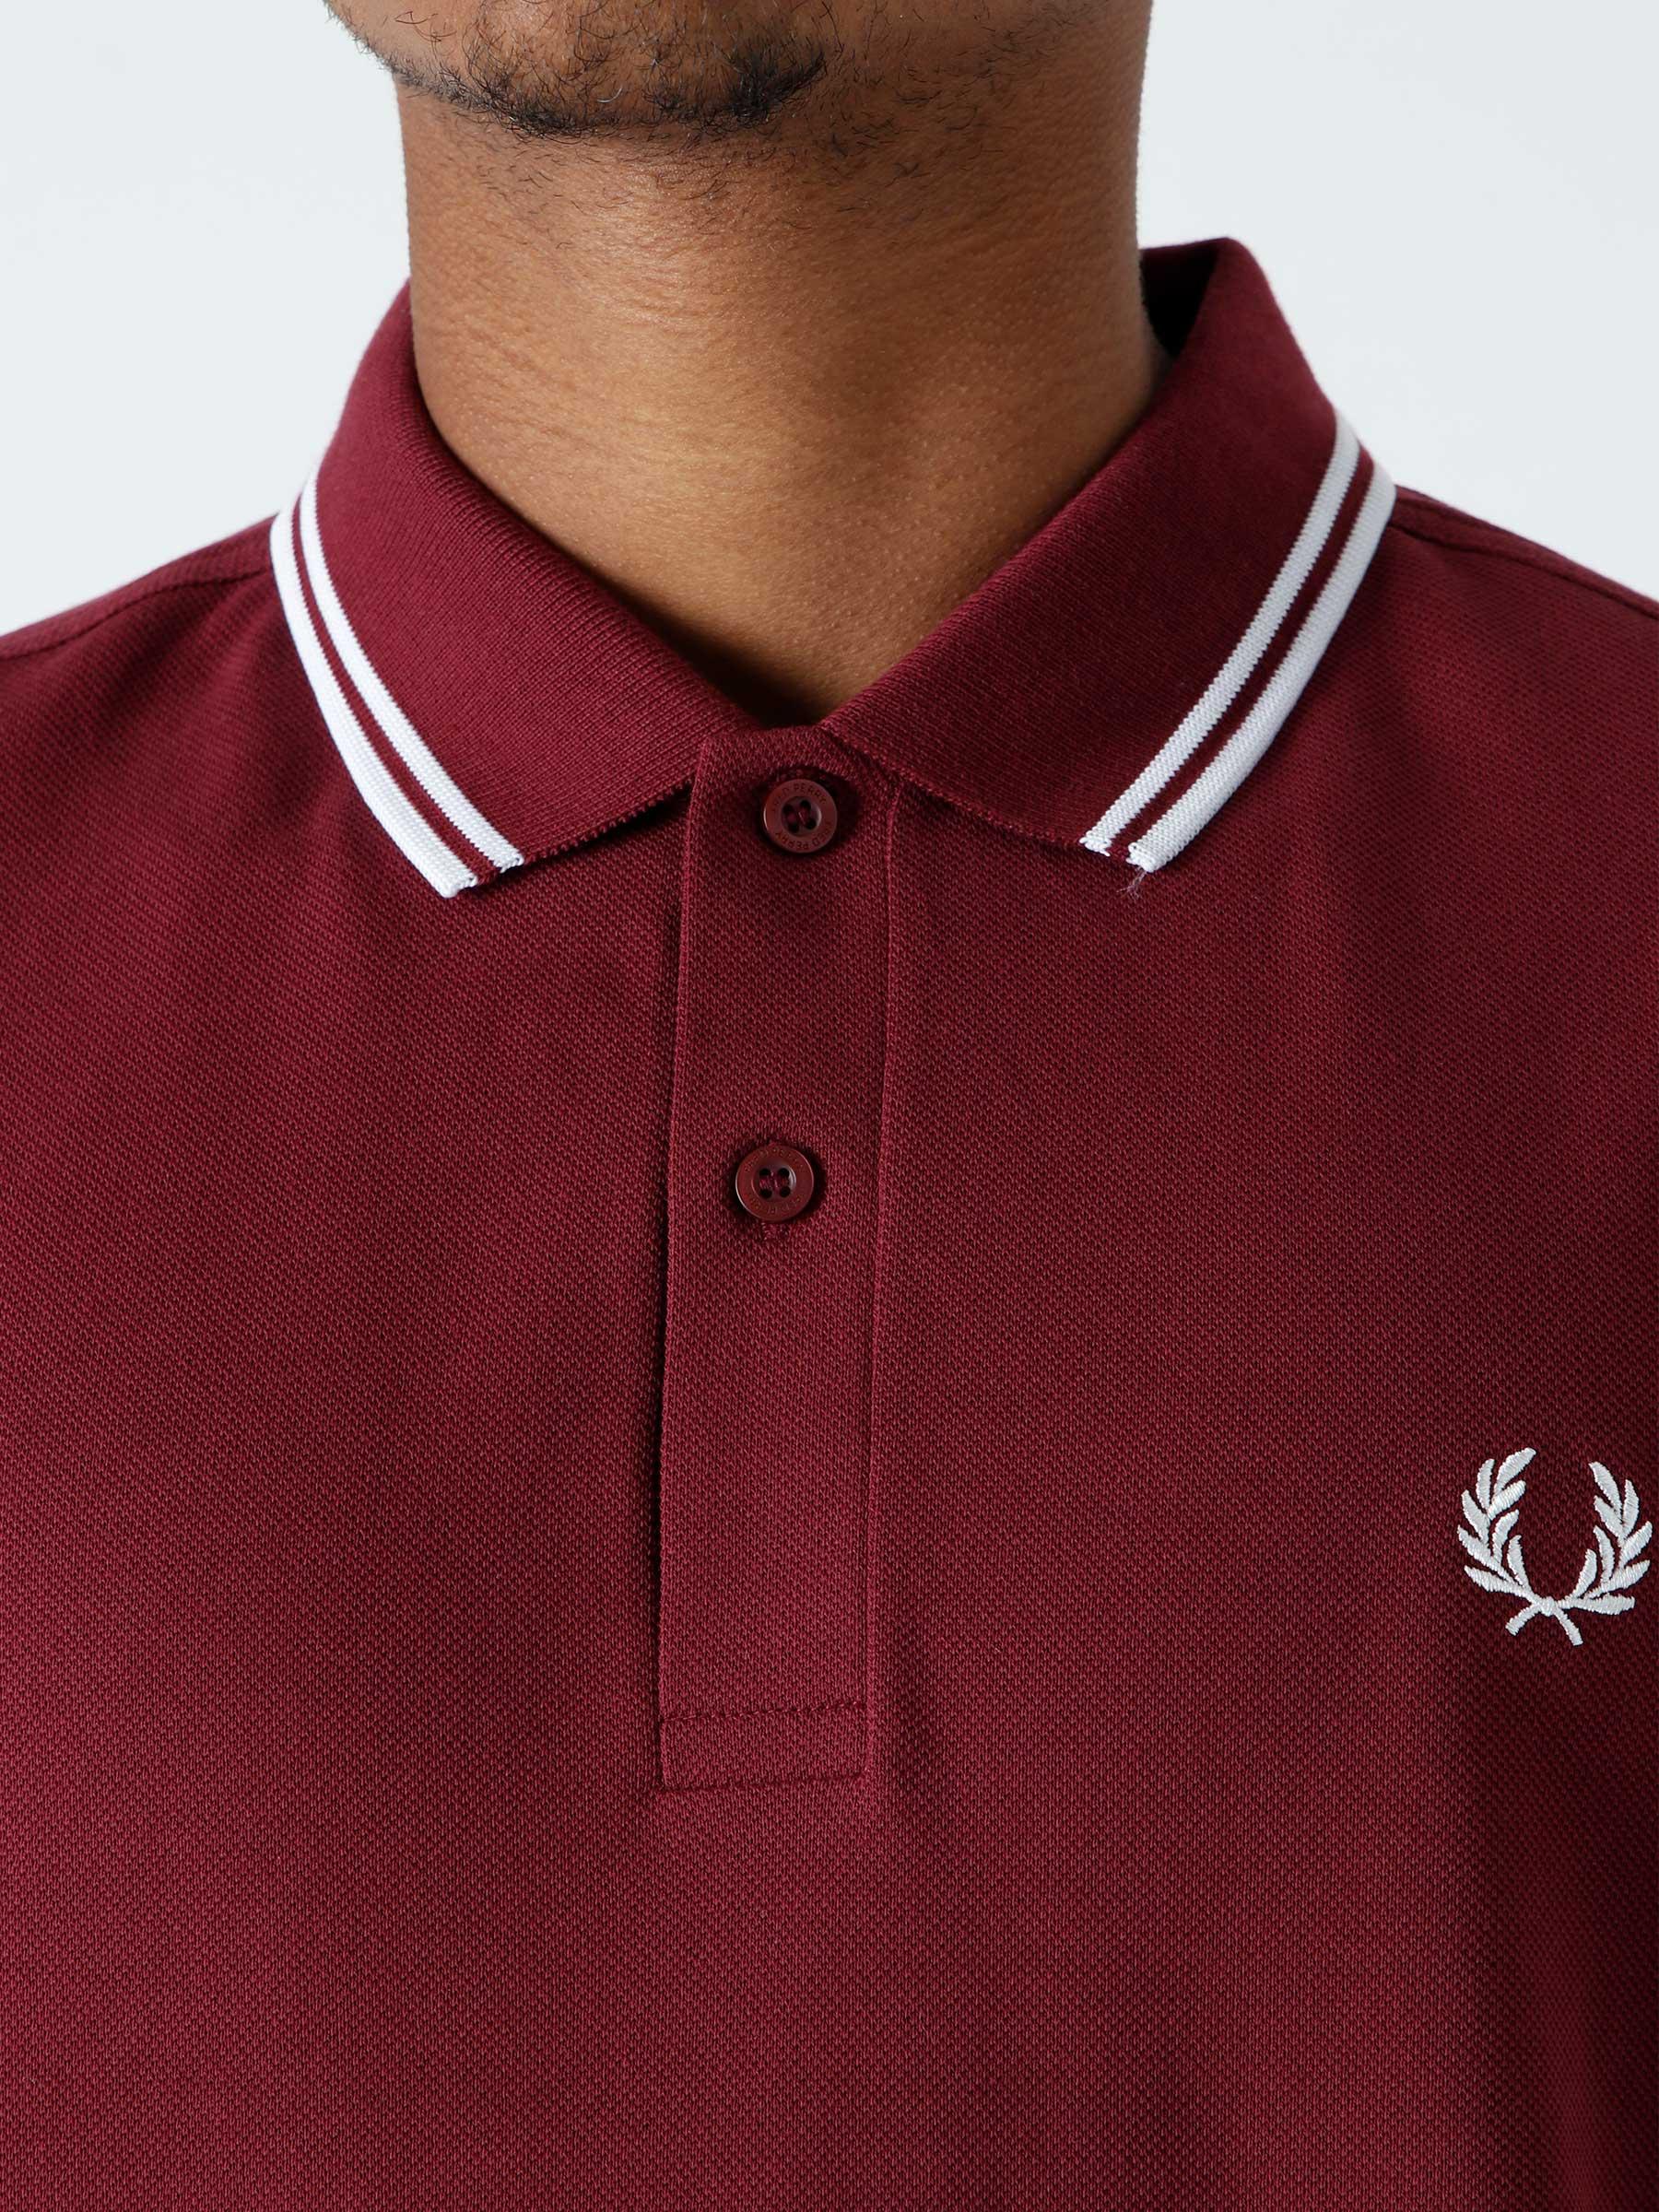 Twin Tipped Fred Perry Shirt Port M3600-122